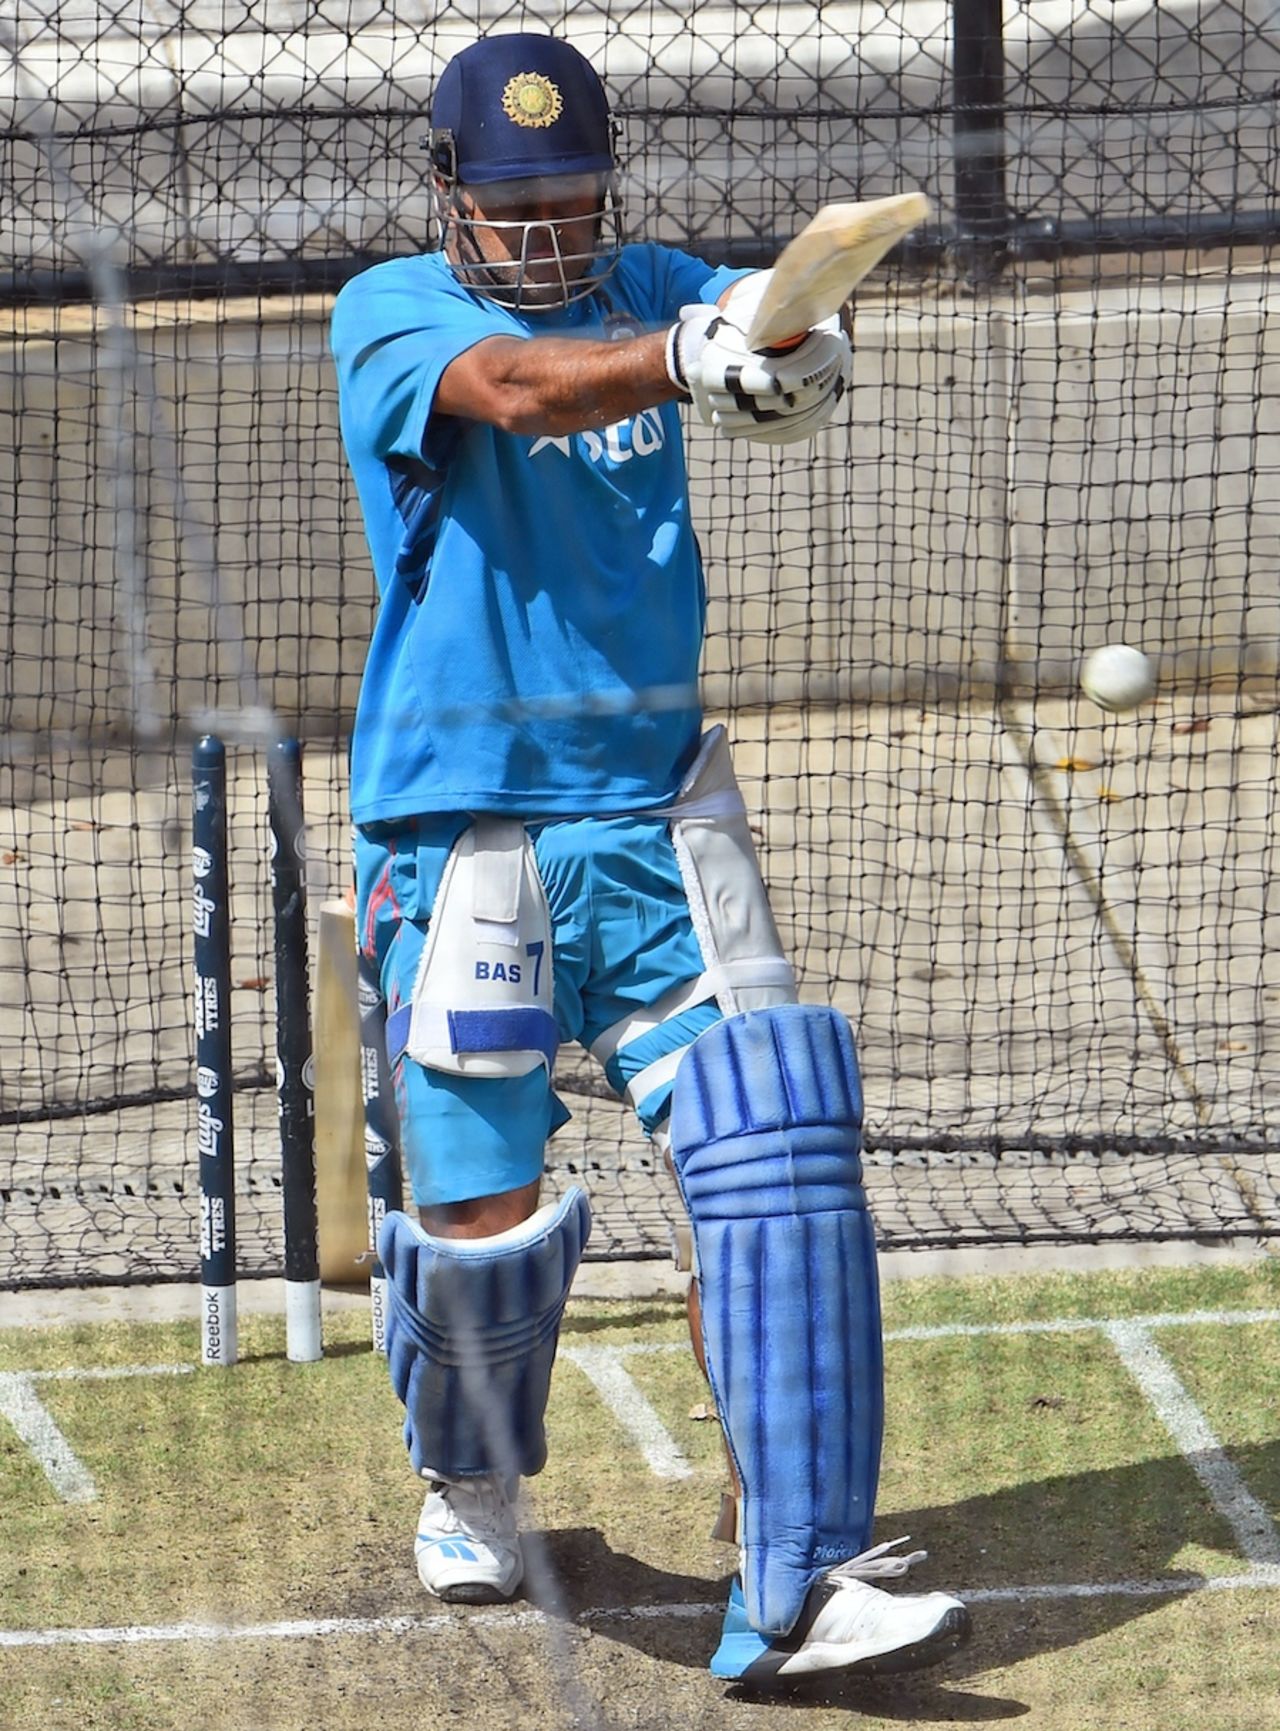 MS Dhoni had a long hit in the nets, World Cup 2015, Adelaide, February 14, 2015